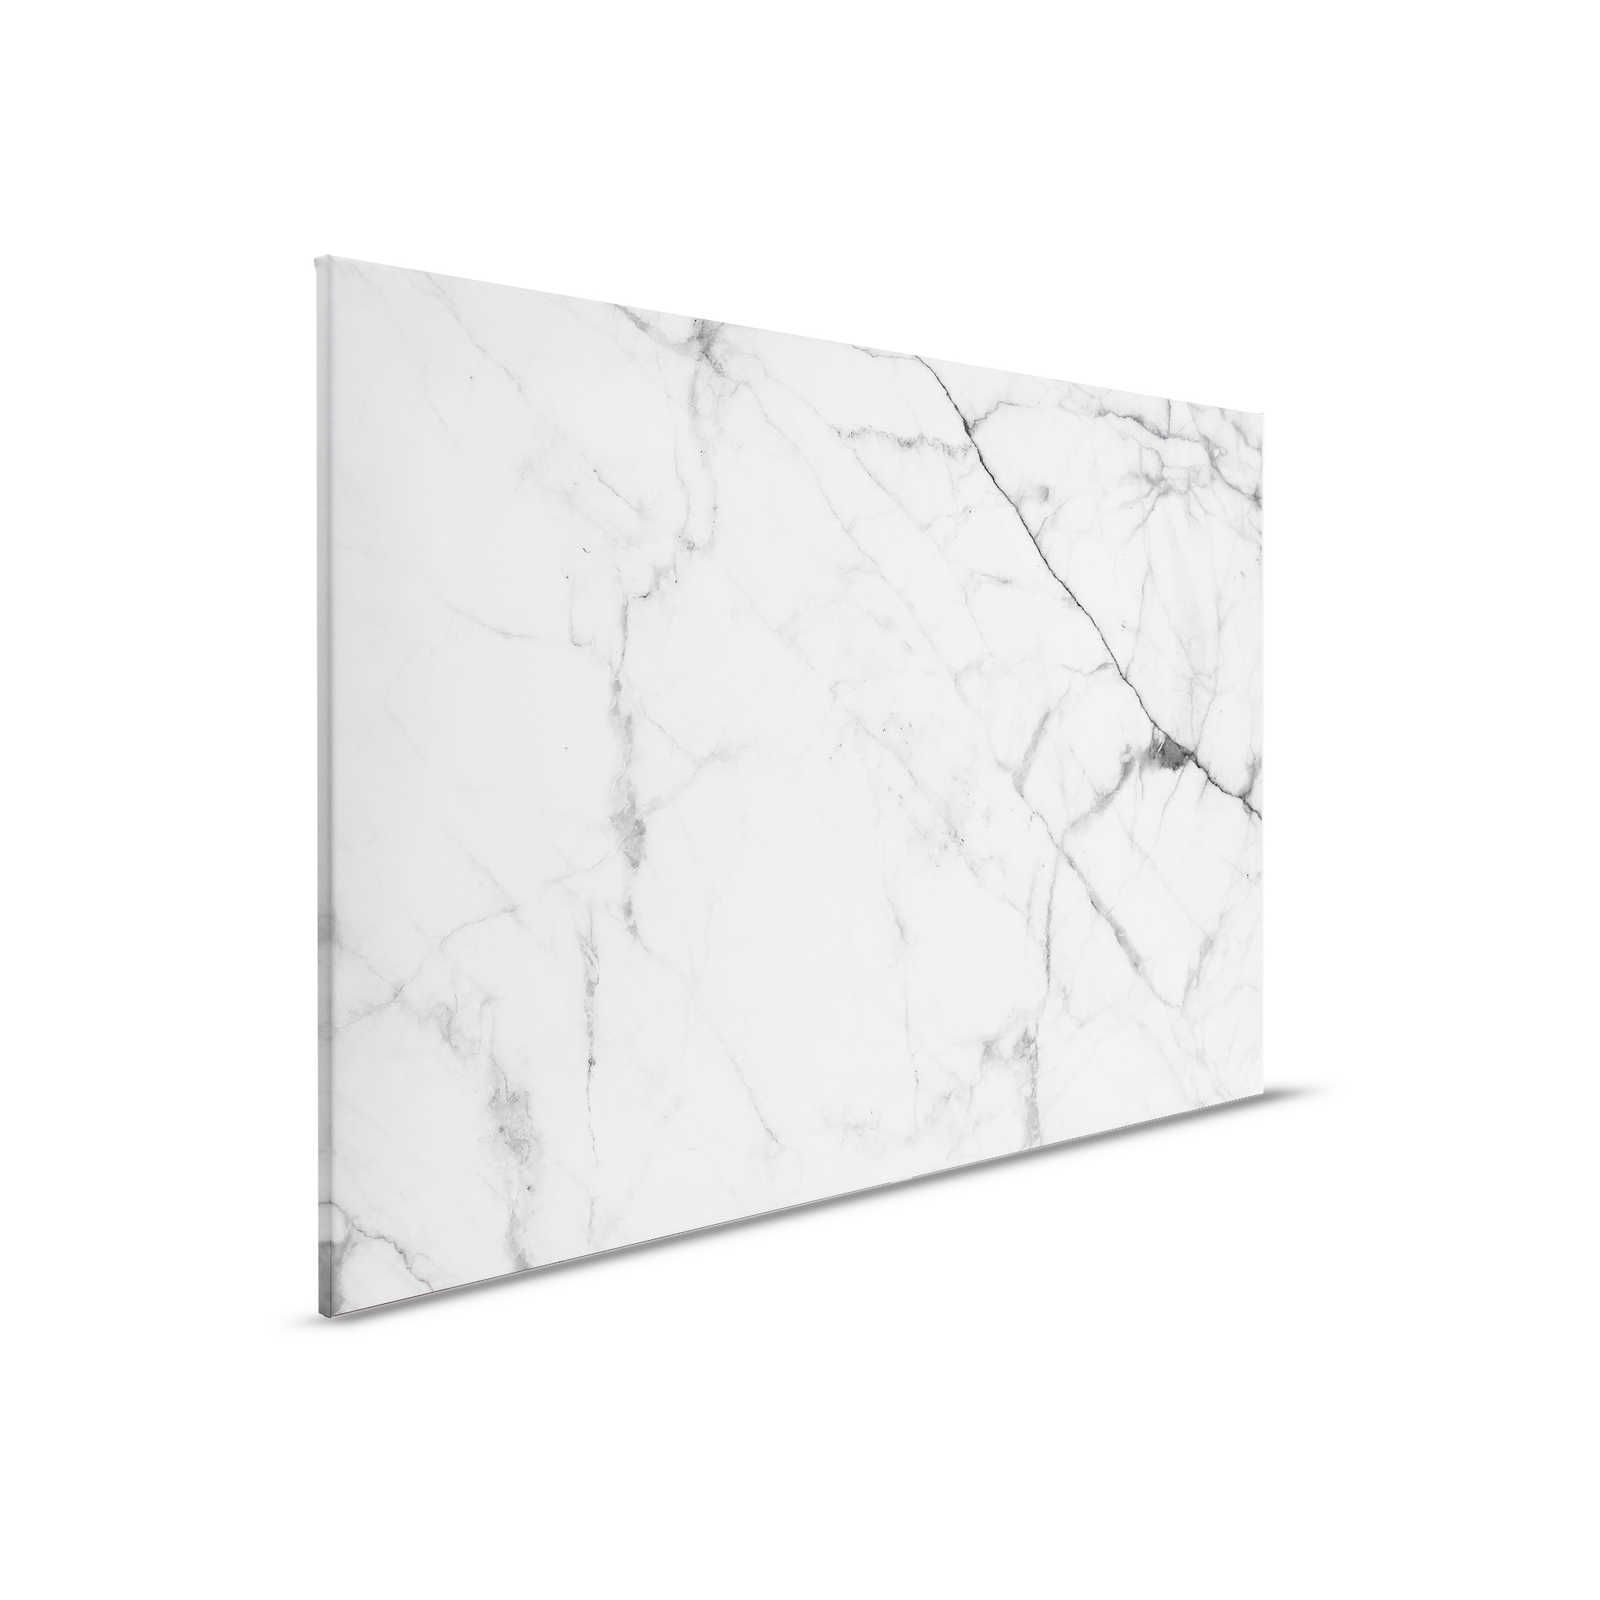         Black and White Canvas Painting Marble with Nature Details - 0.90 m x 0.60 m
    